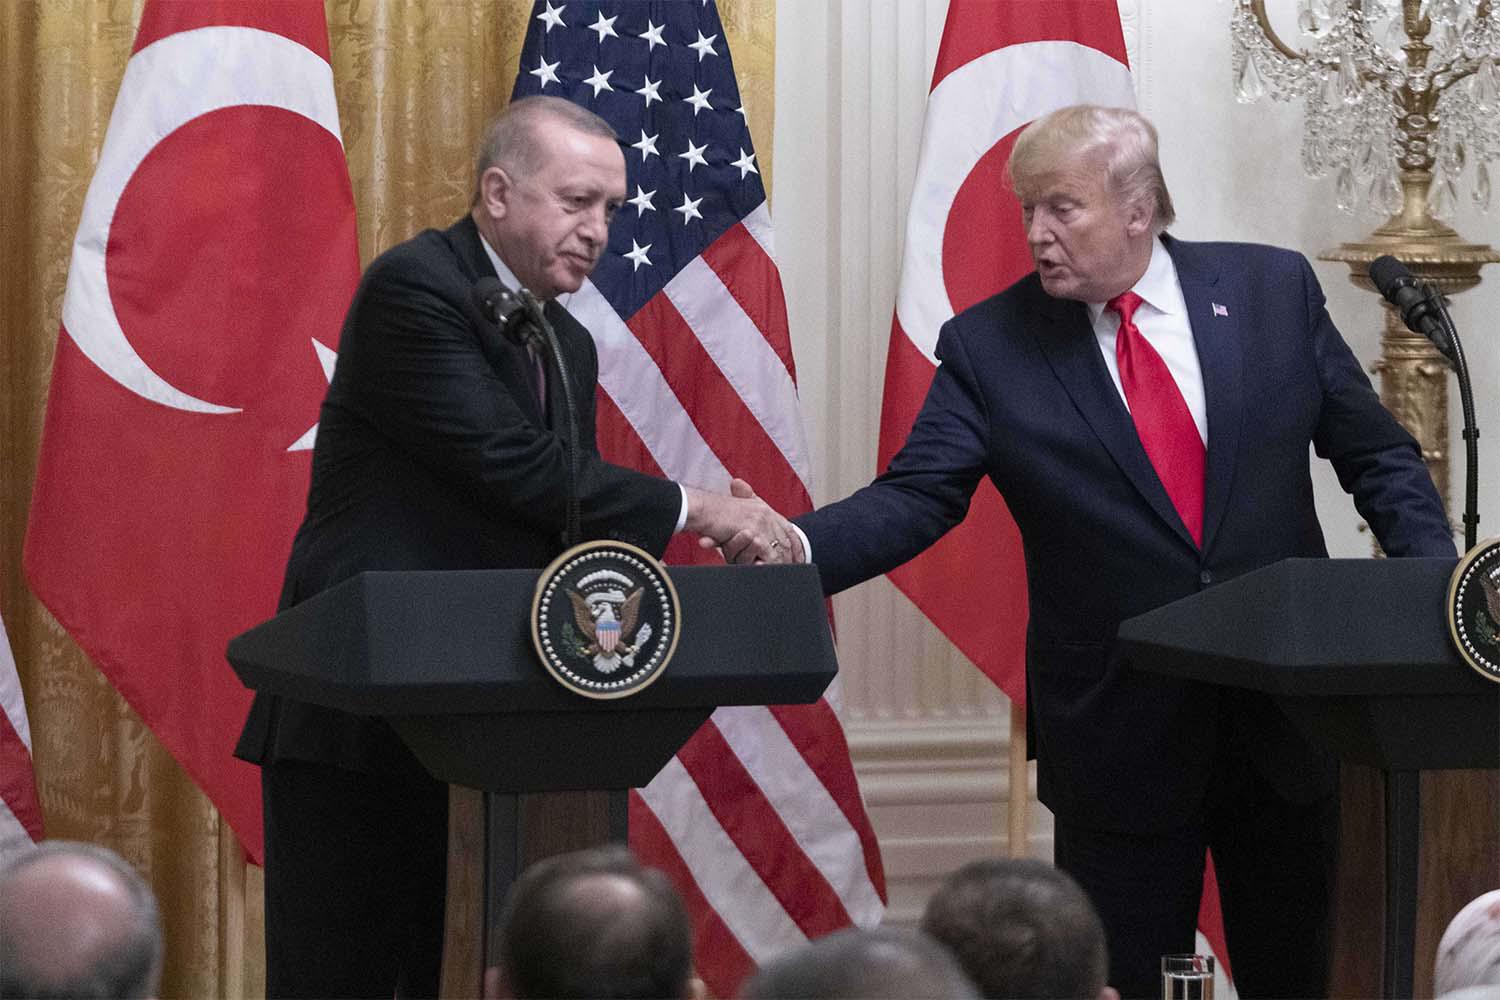 US President Donald Trump (R) shakes hands with Turkish President Recep Tayyip Erdogan during their joint press conference